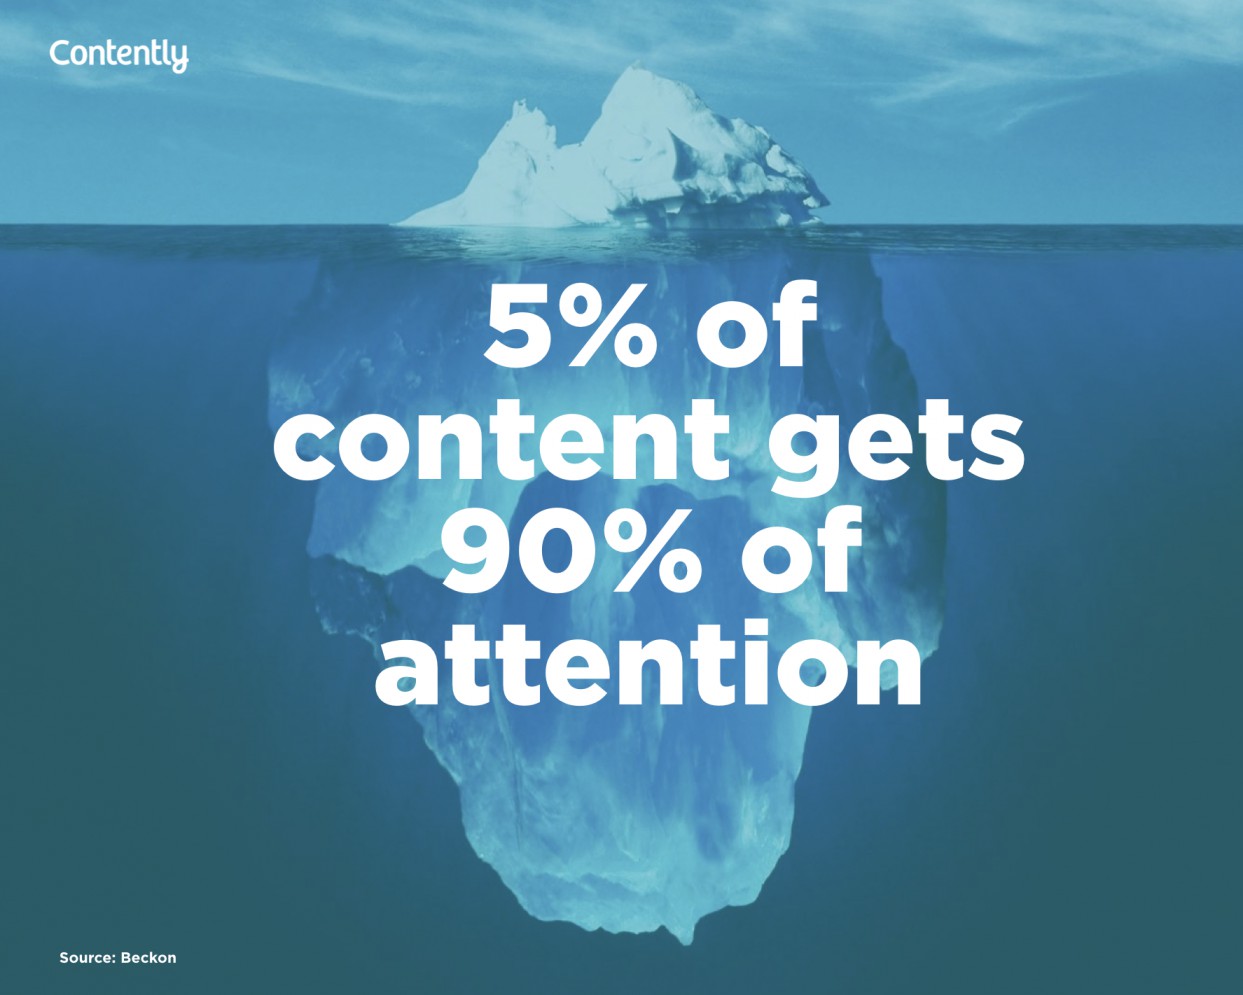 5% content gets 90% attention